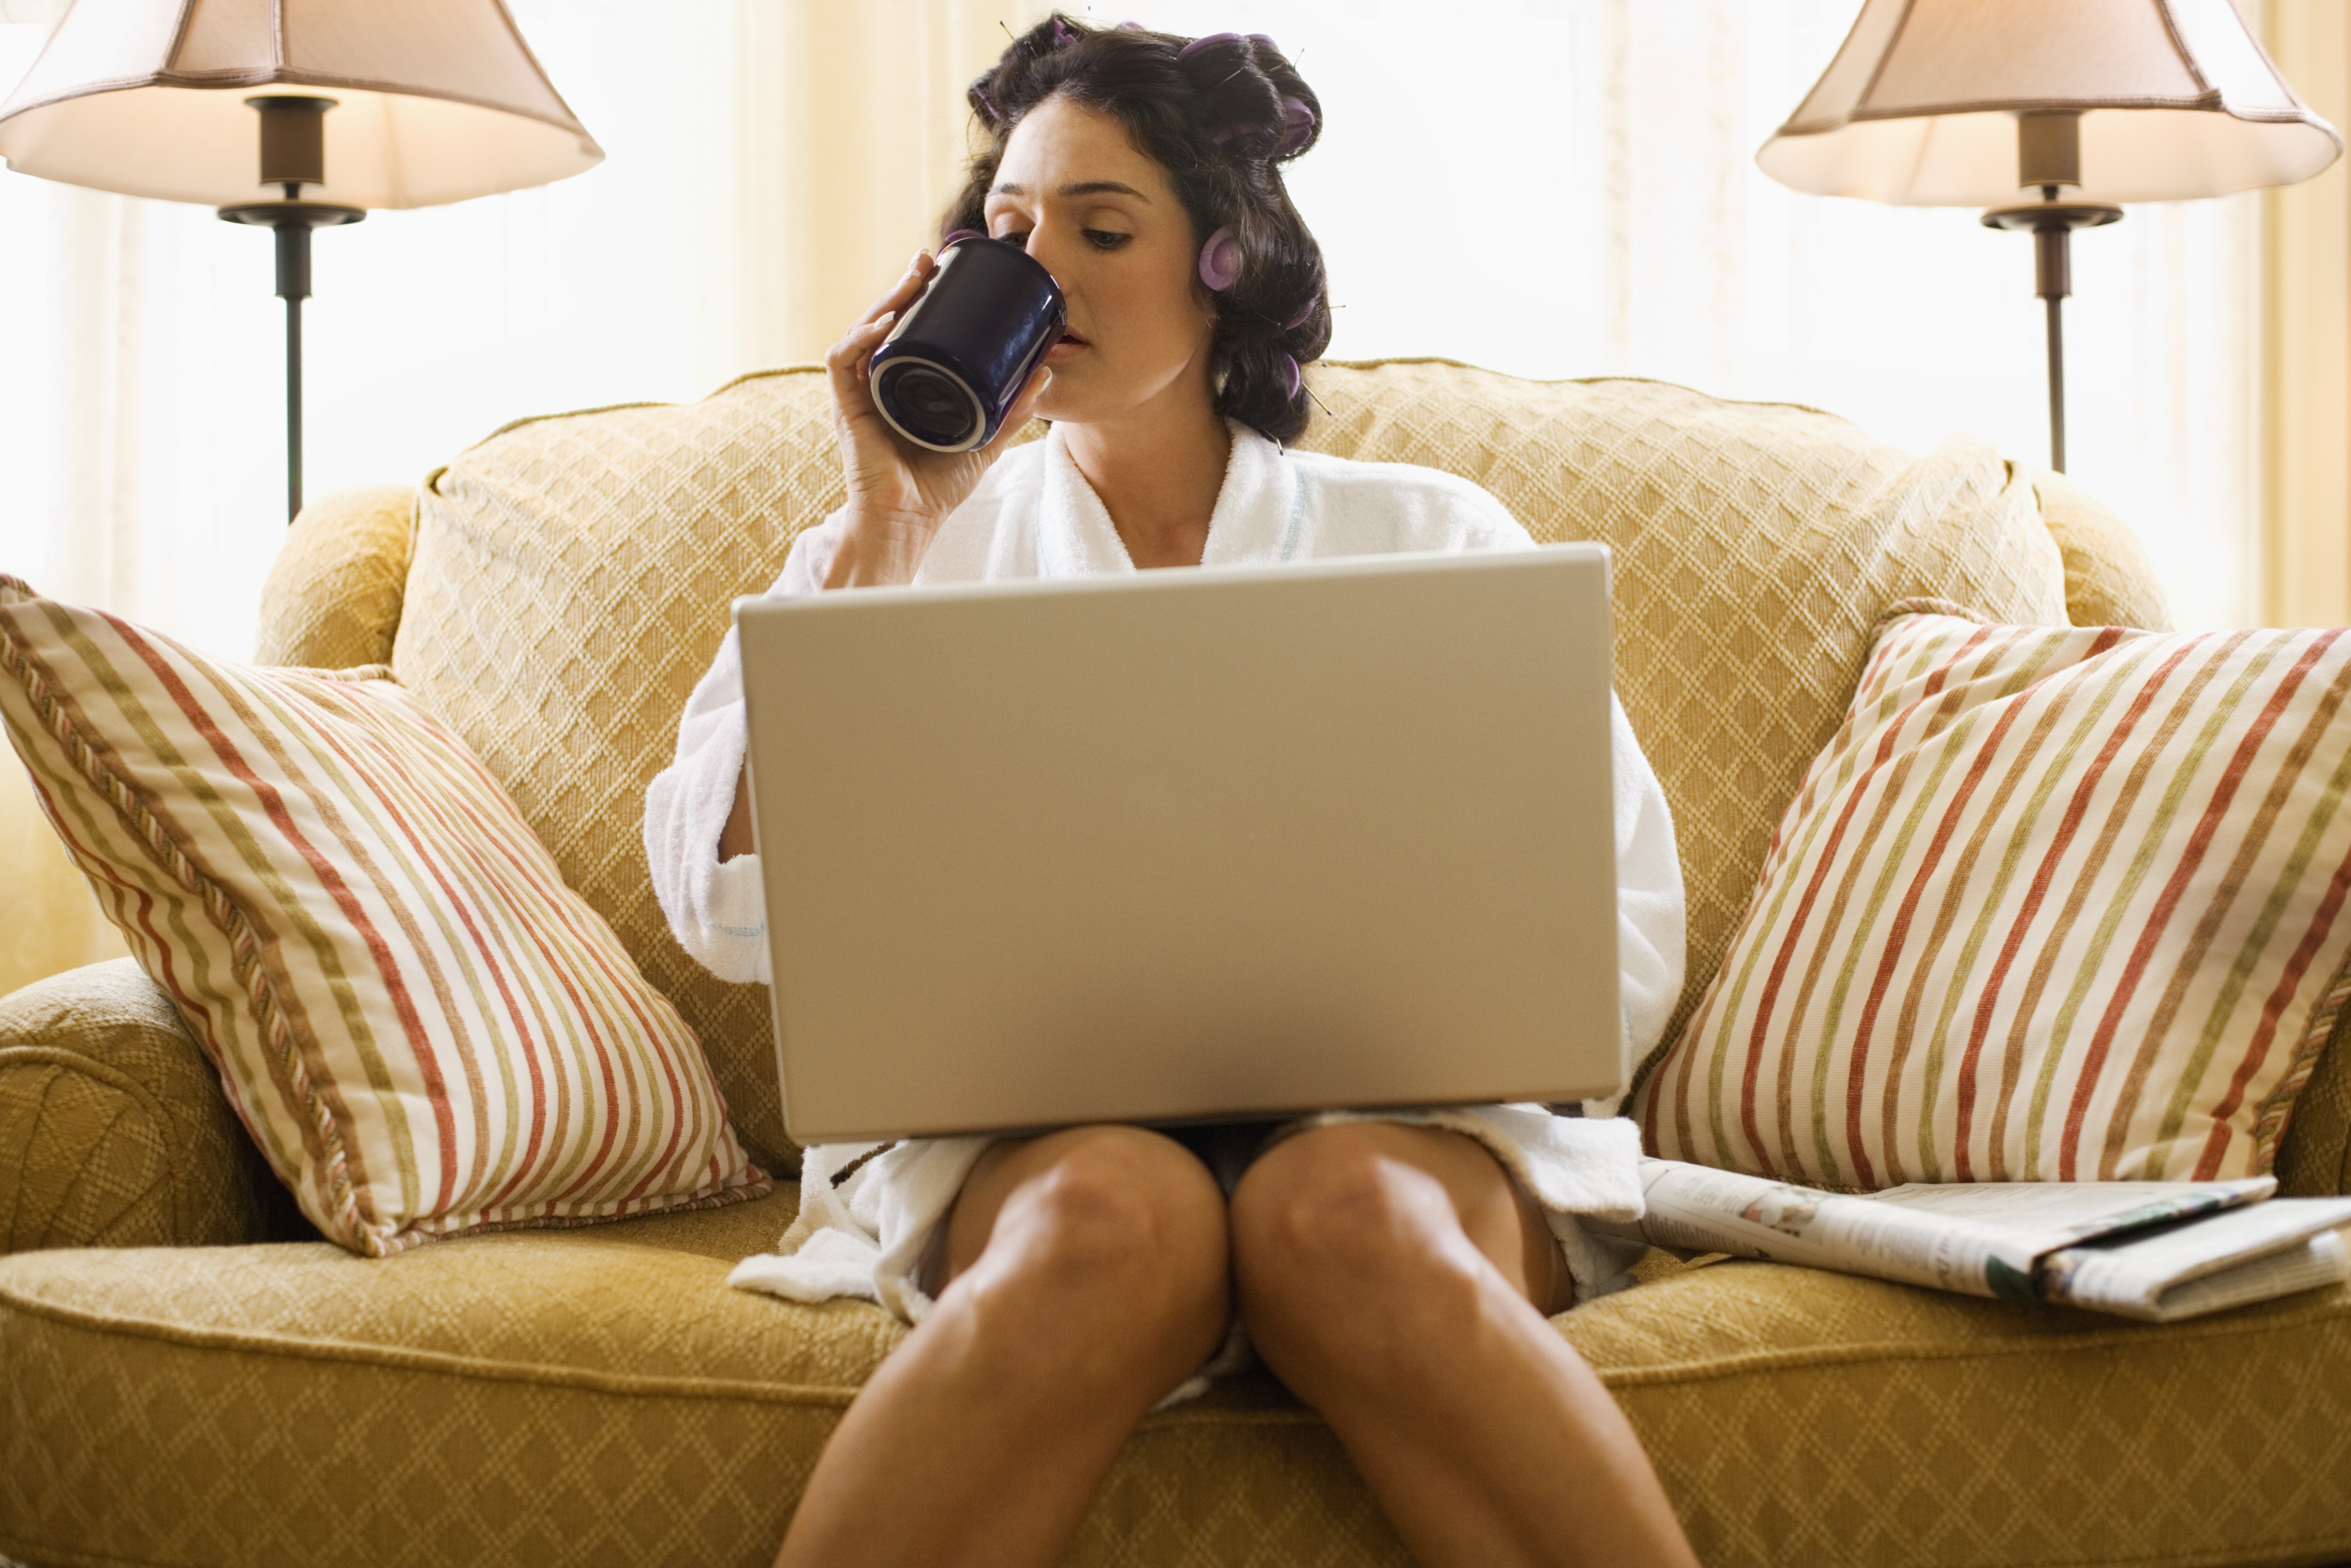 15 work-from-home online businesses you can start today